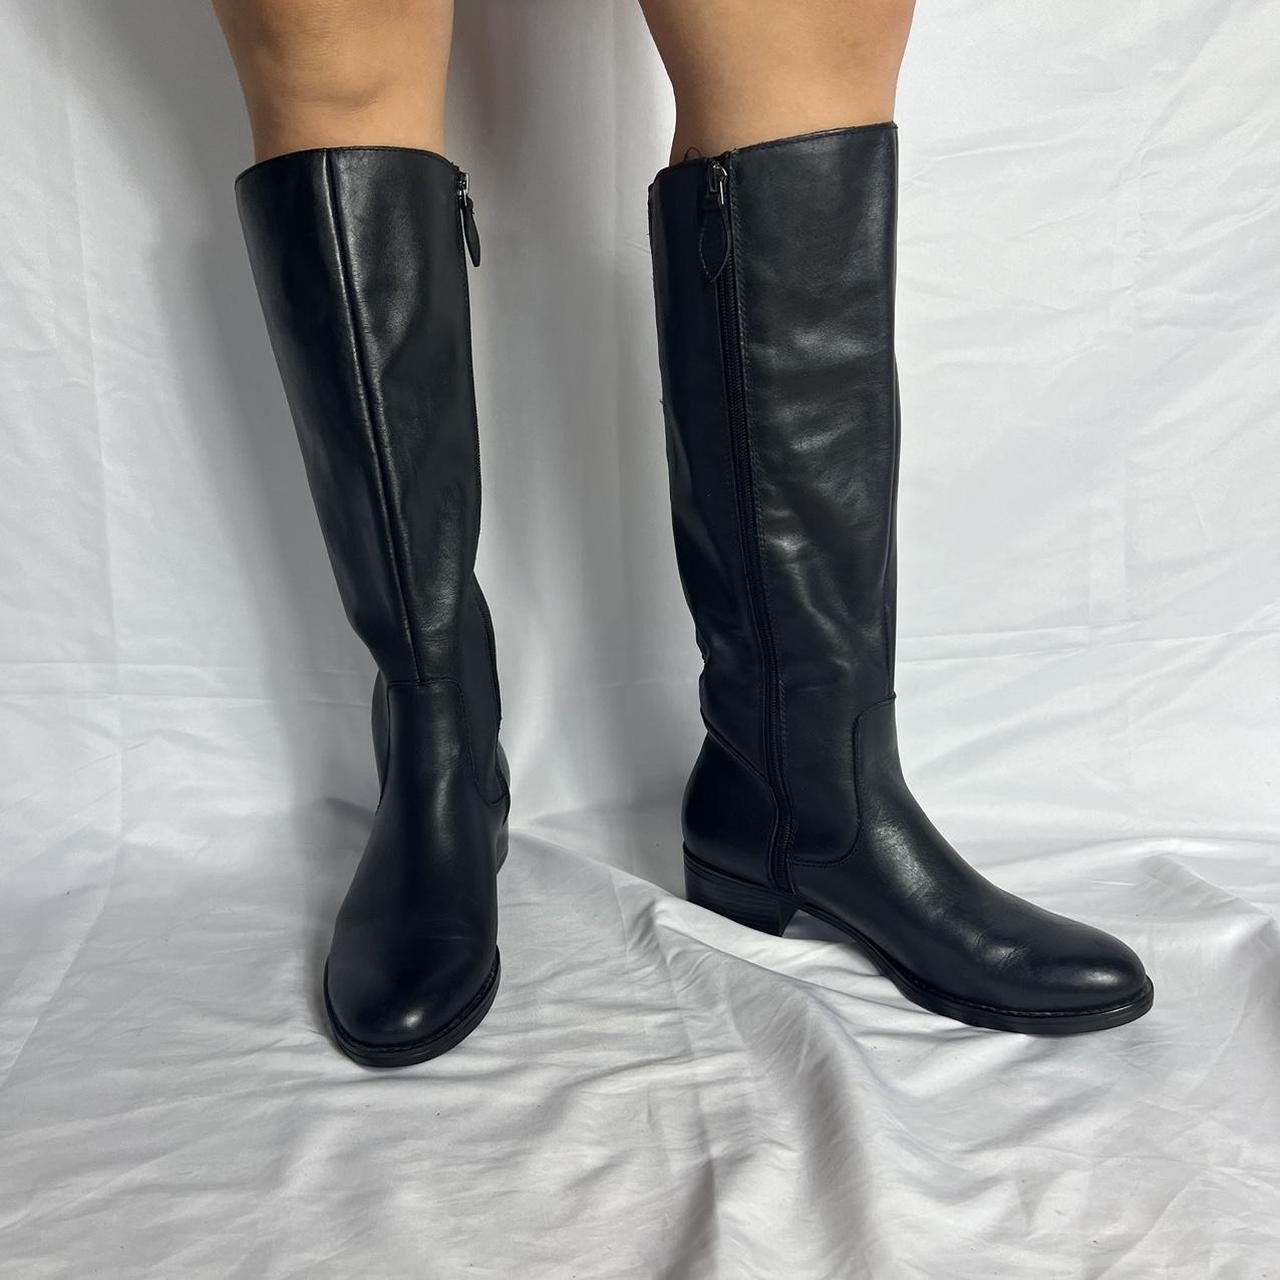 Leather Knee-High Boots Insane brand new knee-high... - Depop